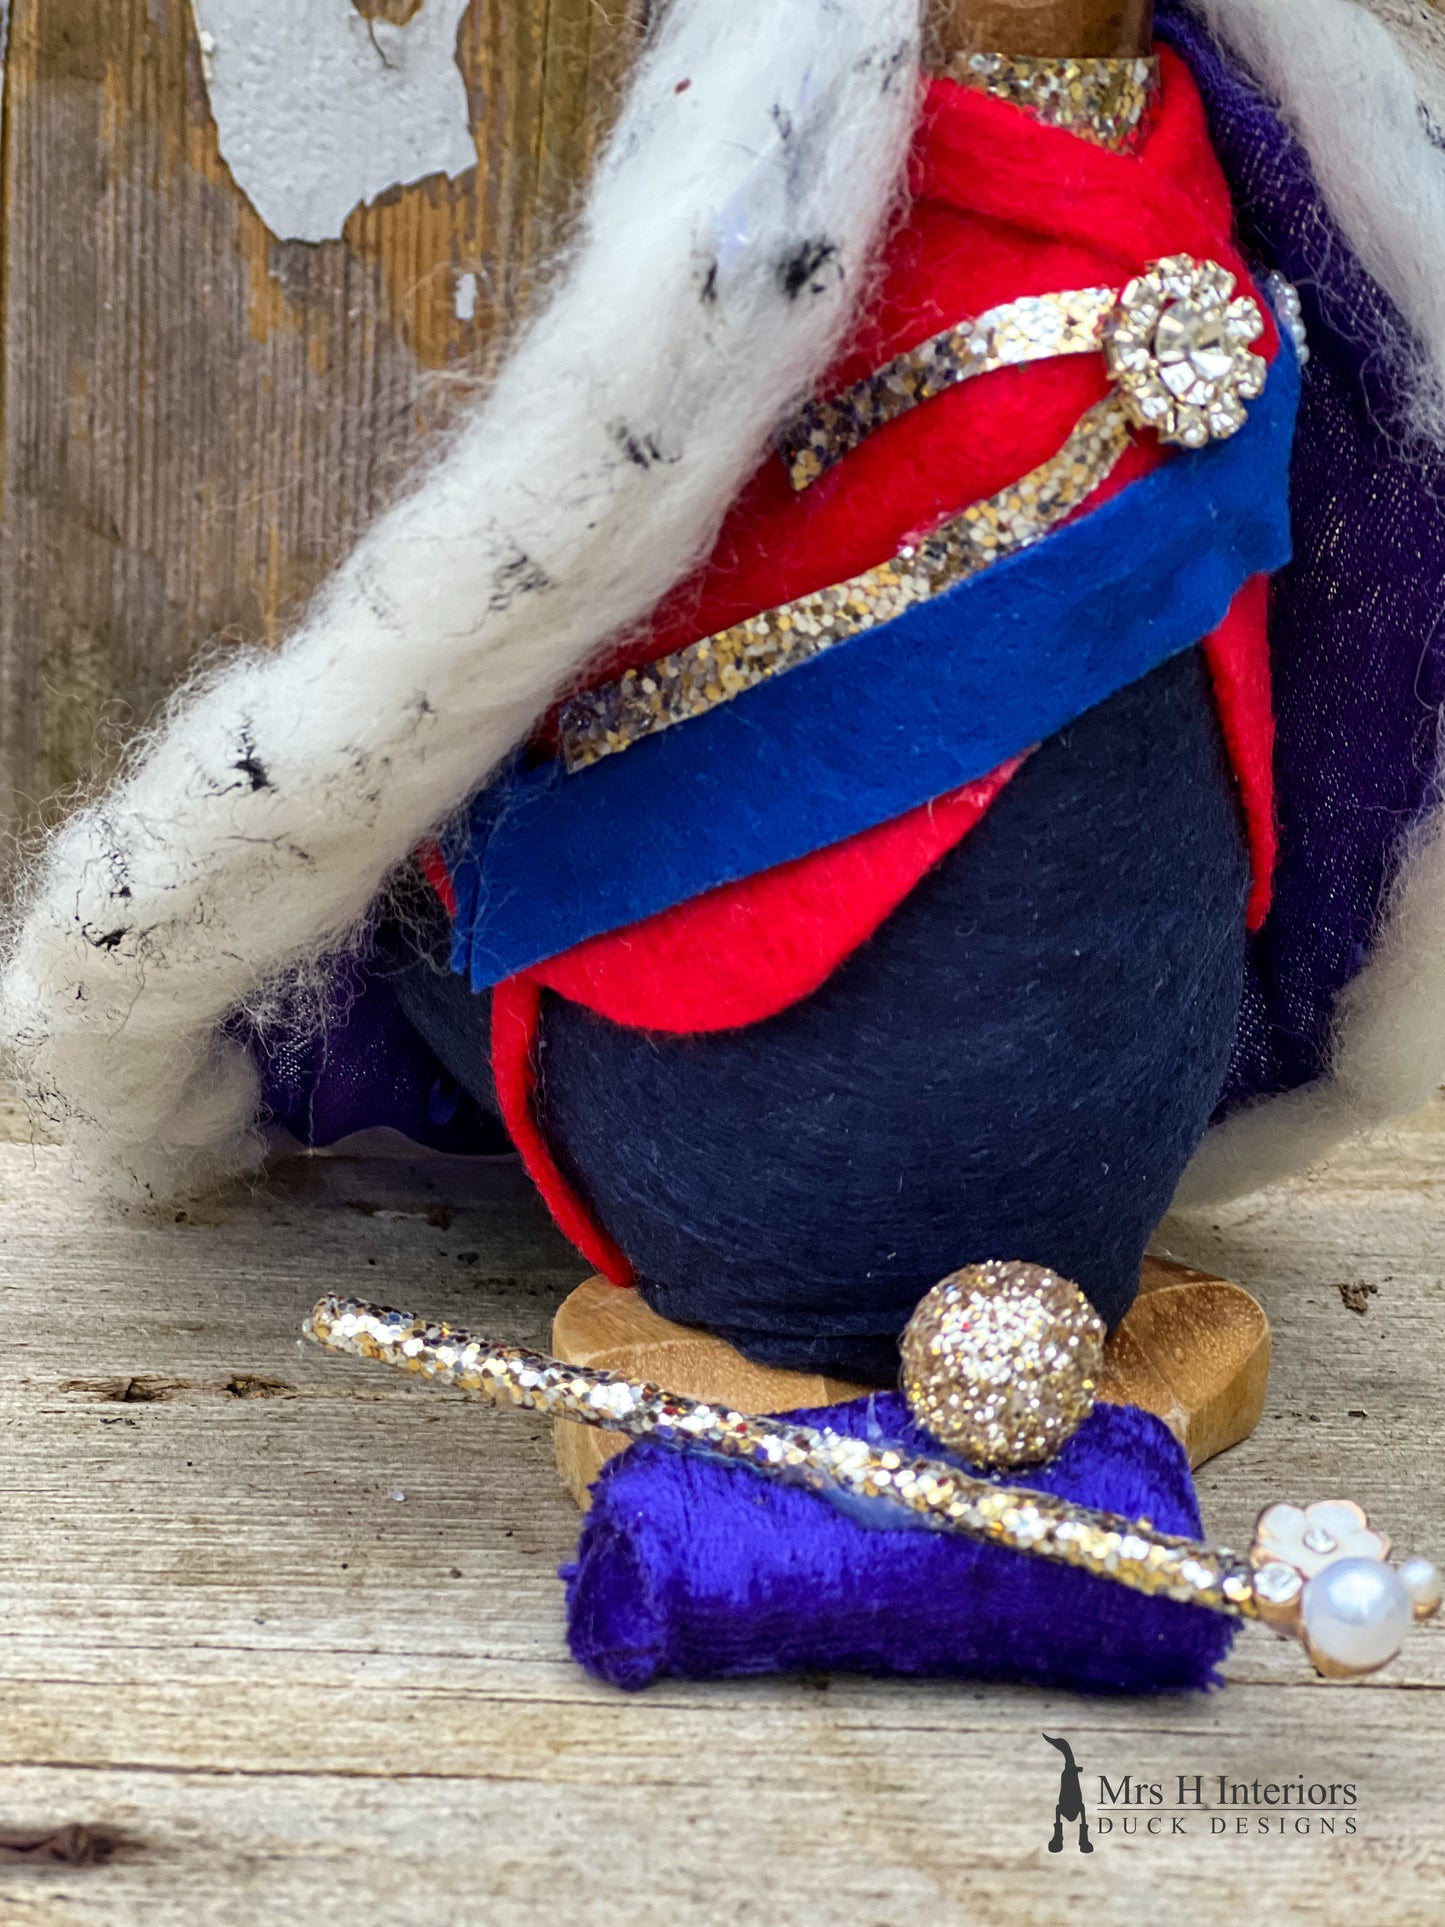 HRH King Charles III Coronation Duck - Decorated Wooden Duck by Mrs H the Duck Lady